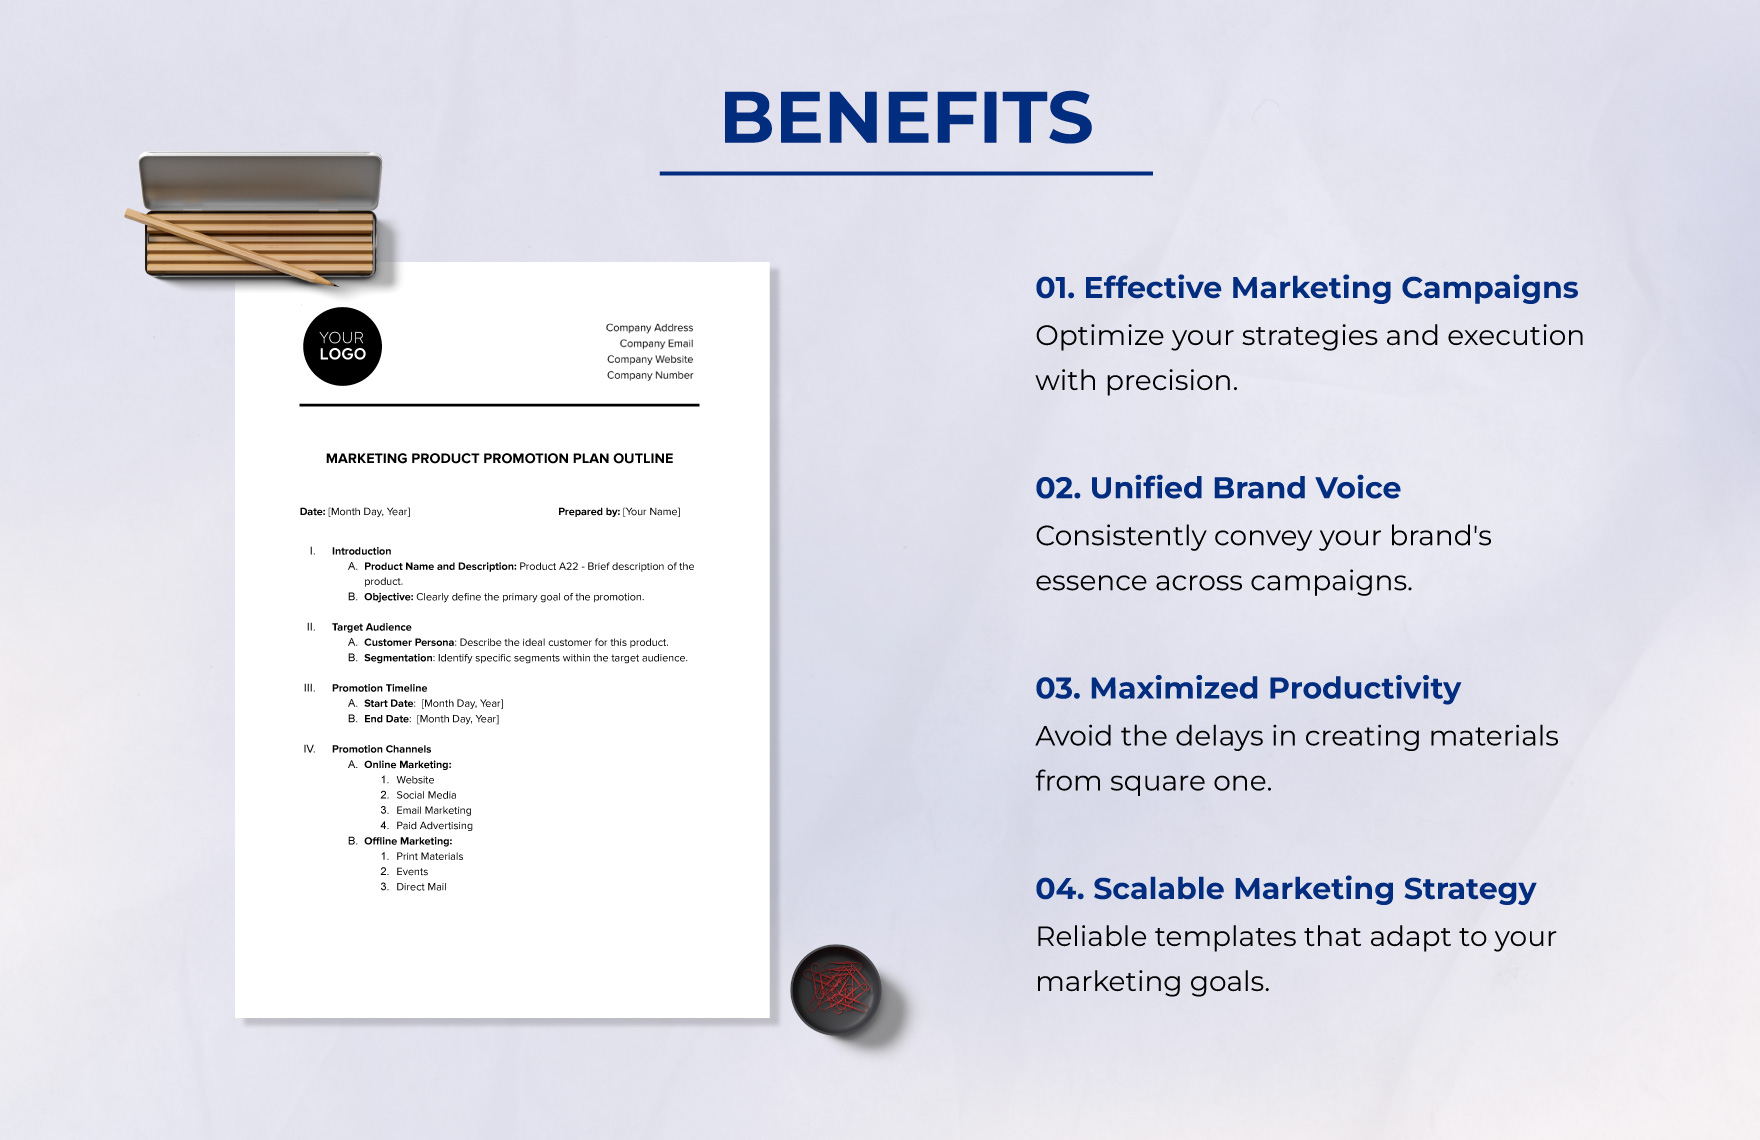 Marketing Product Promotion Plan Outline Template